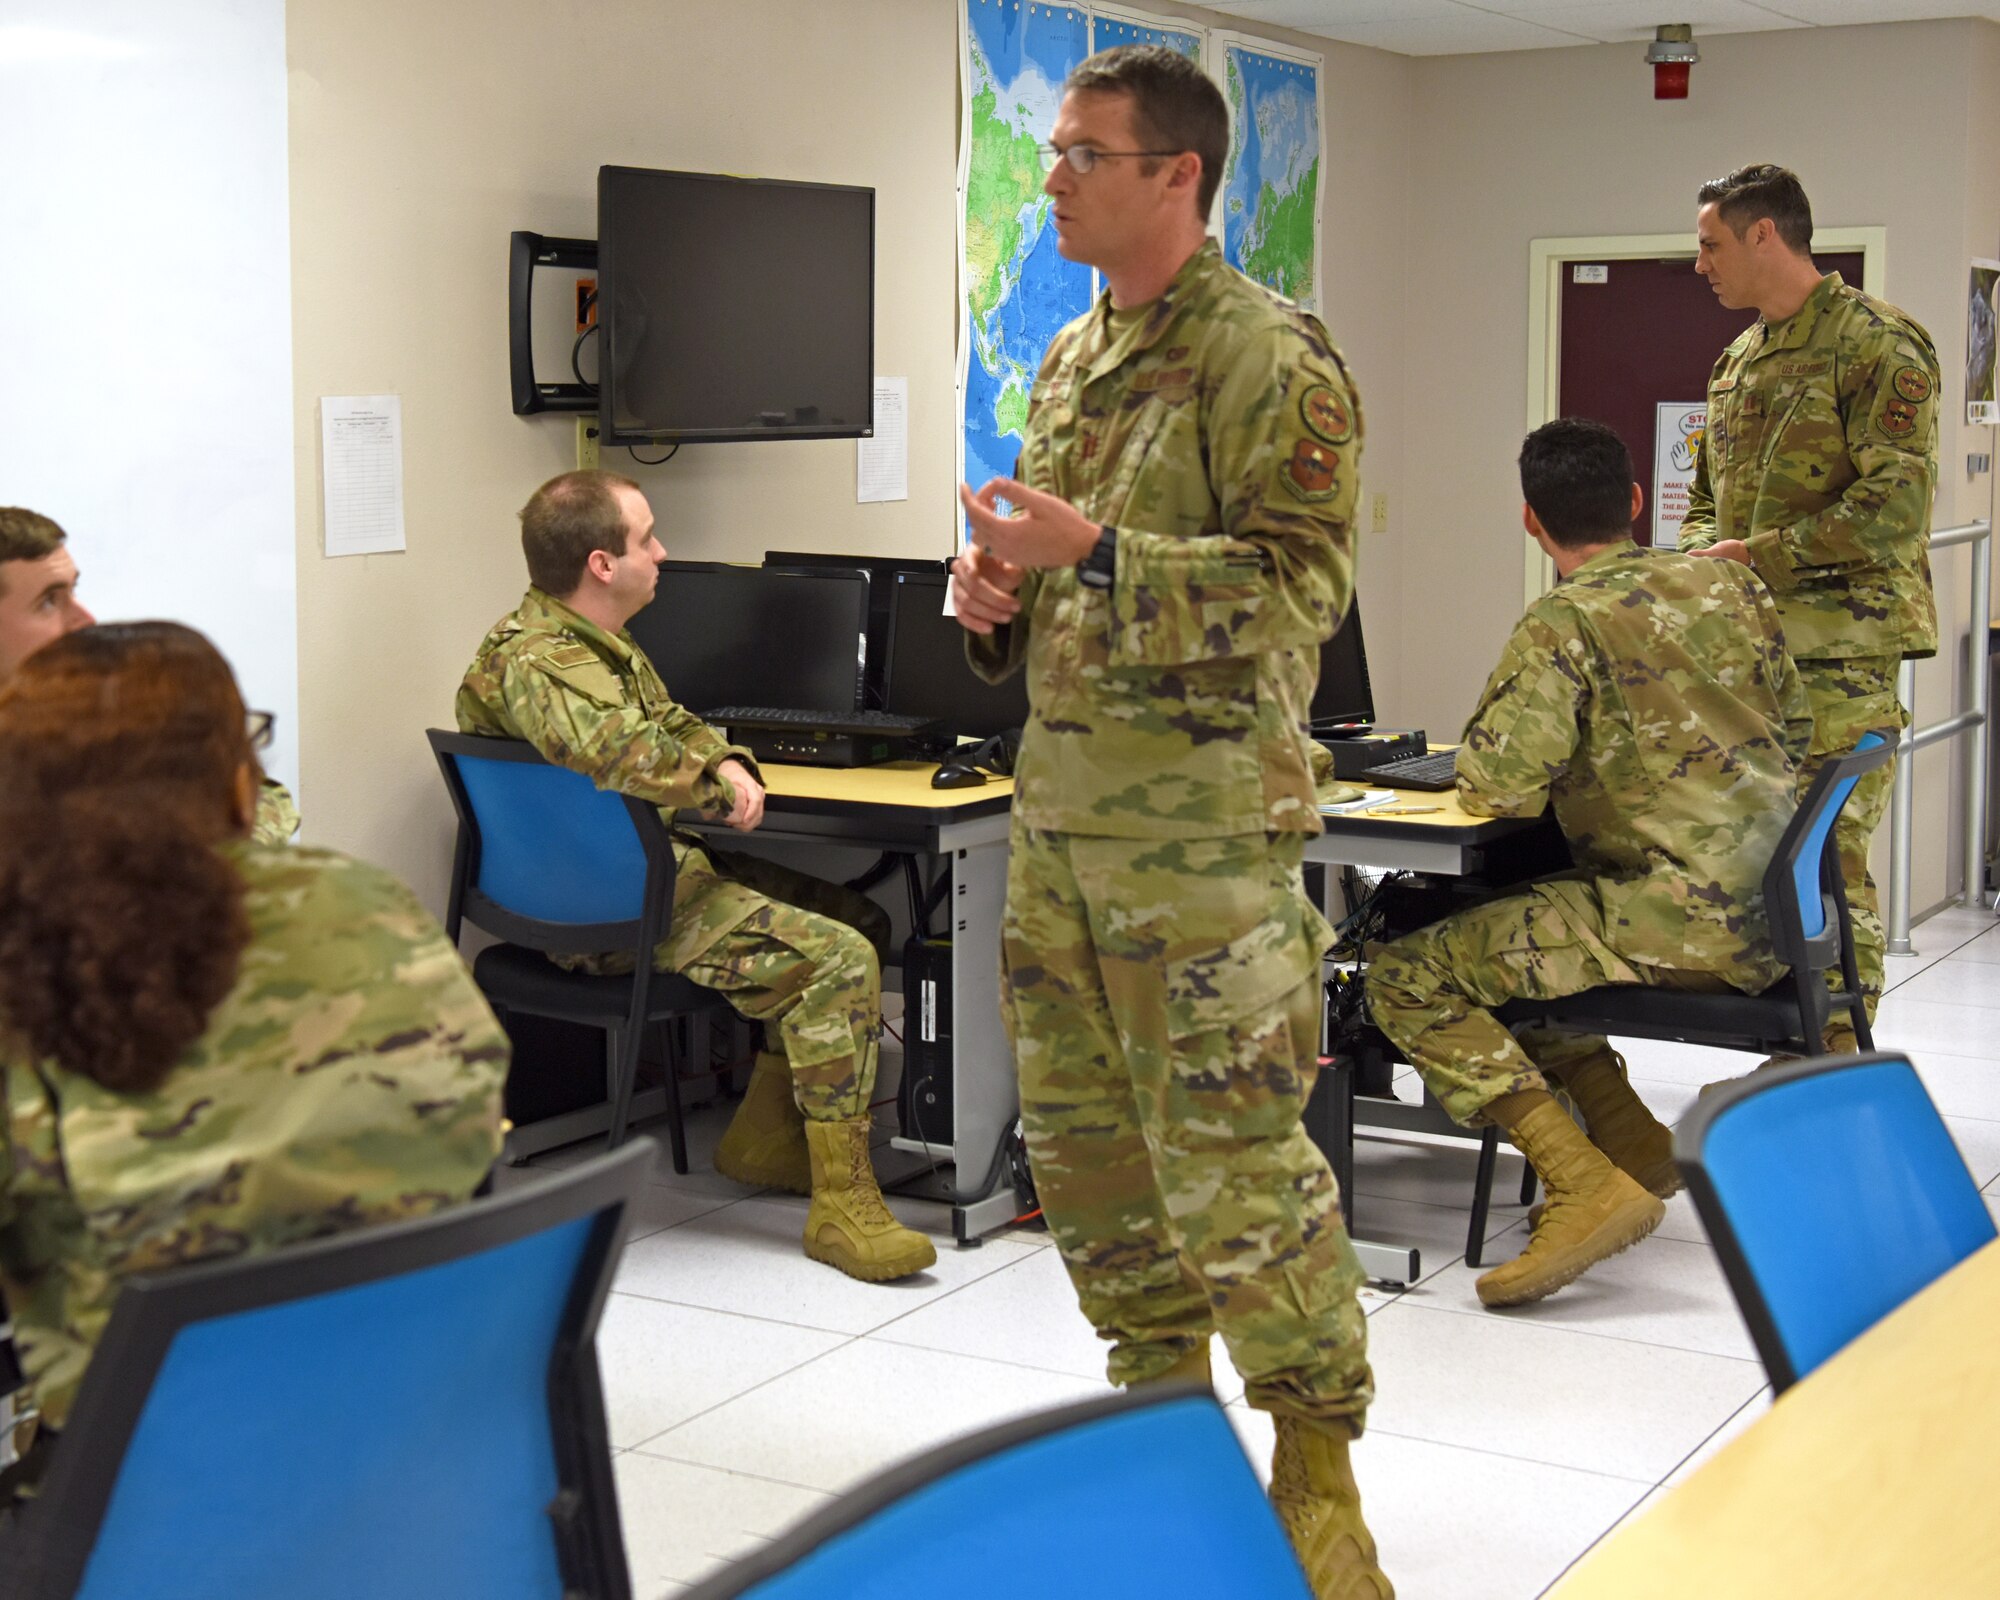 U.S. Air Force Capt. Perry Byrd, 315th Training Squadron instructor, explains concepts to students in the 14N Intelligence Officer course, on Goodfellow Air Force Base, Texas, June 6, 2021. Byrd graduated from the 14N course in 2015 and transferred the course credits towards his master’s degree. (U.S. Air Force photo by Senior Airman Abbey Rieves) *NOTE: This photo has been edited to distort computer classification markers.